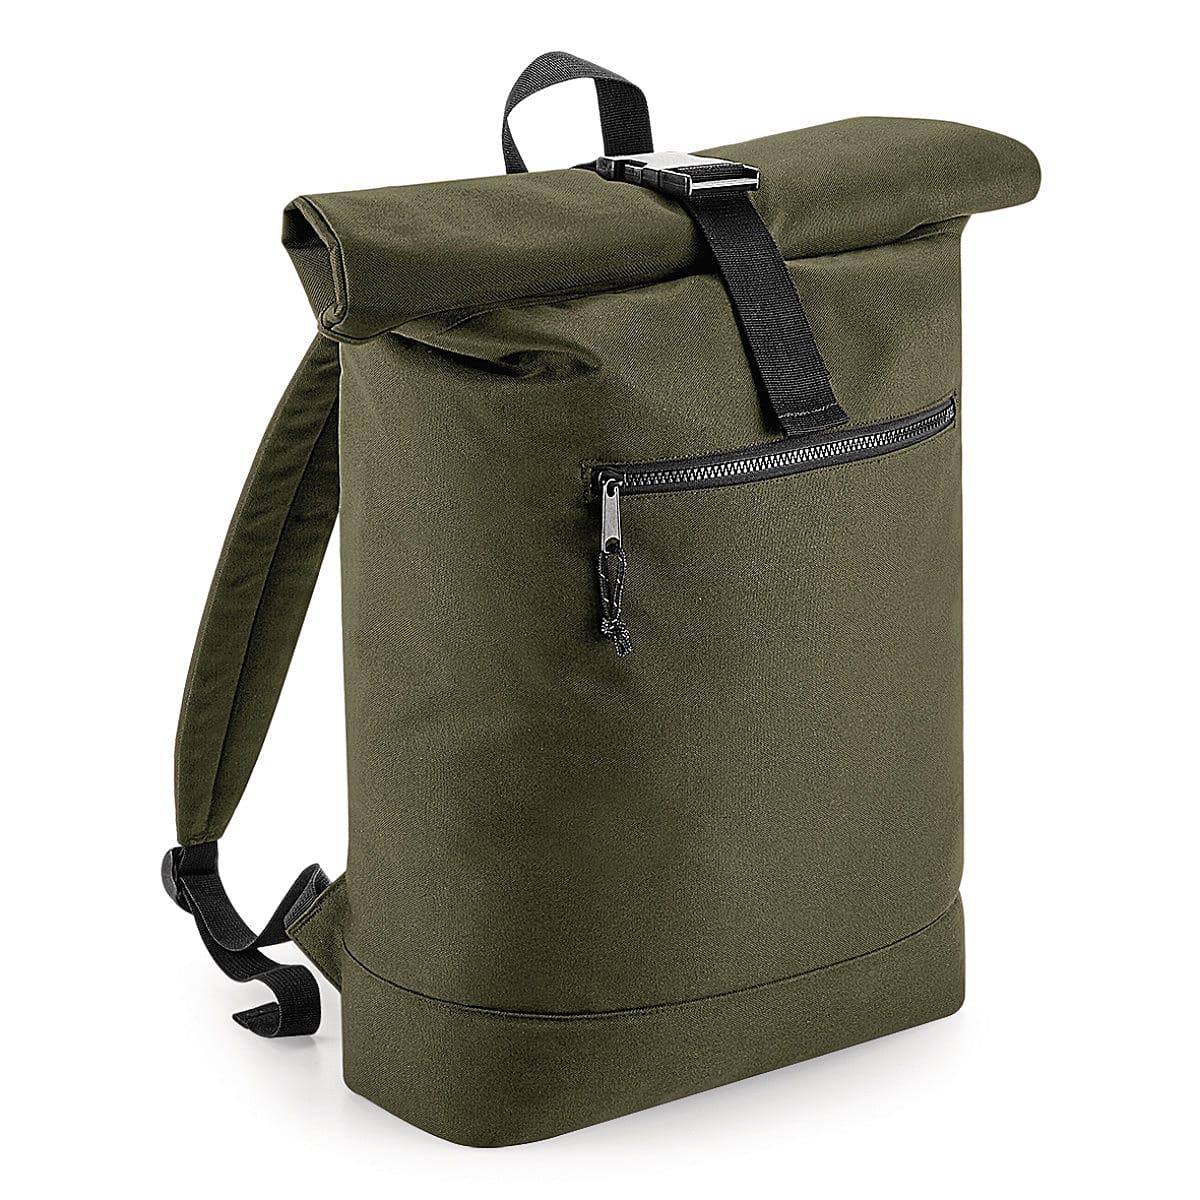 Bagbase Recycled Rolltop Backpack in Military Green (Product Code: BG286)